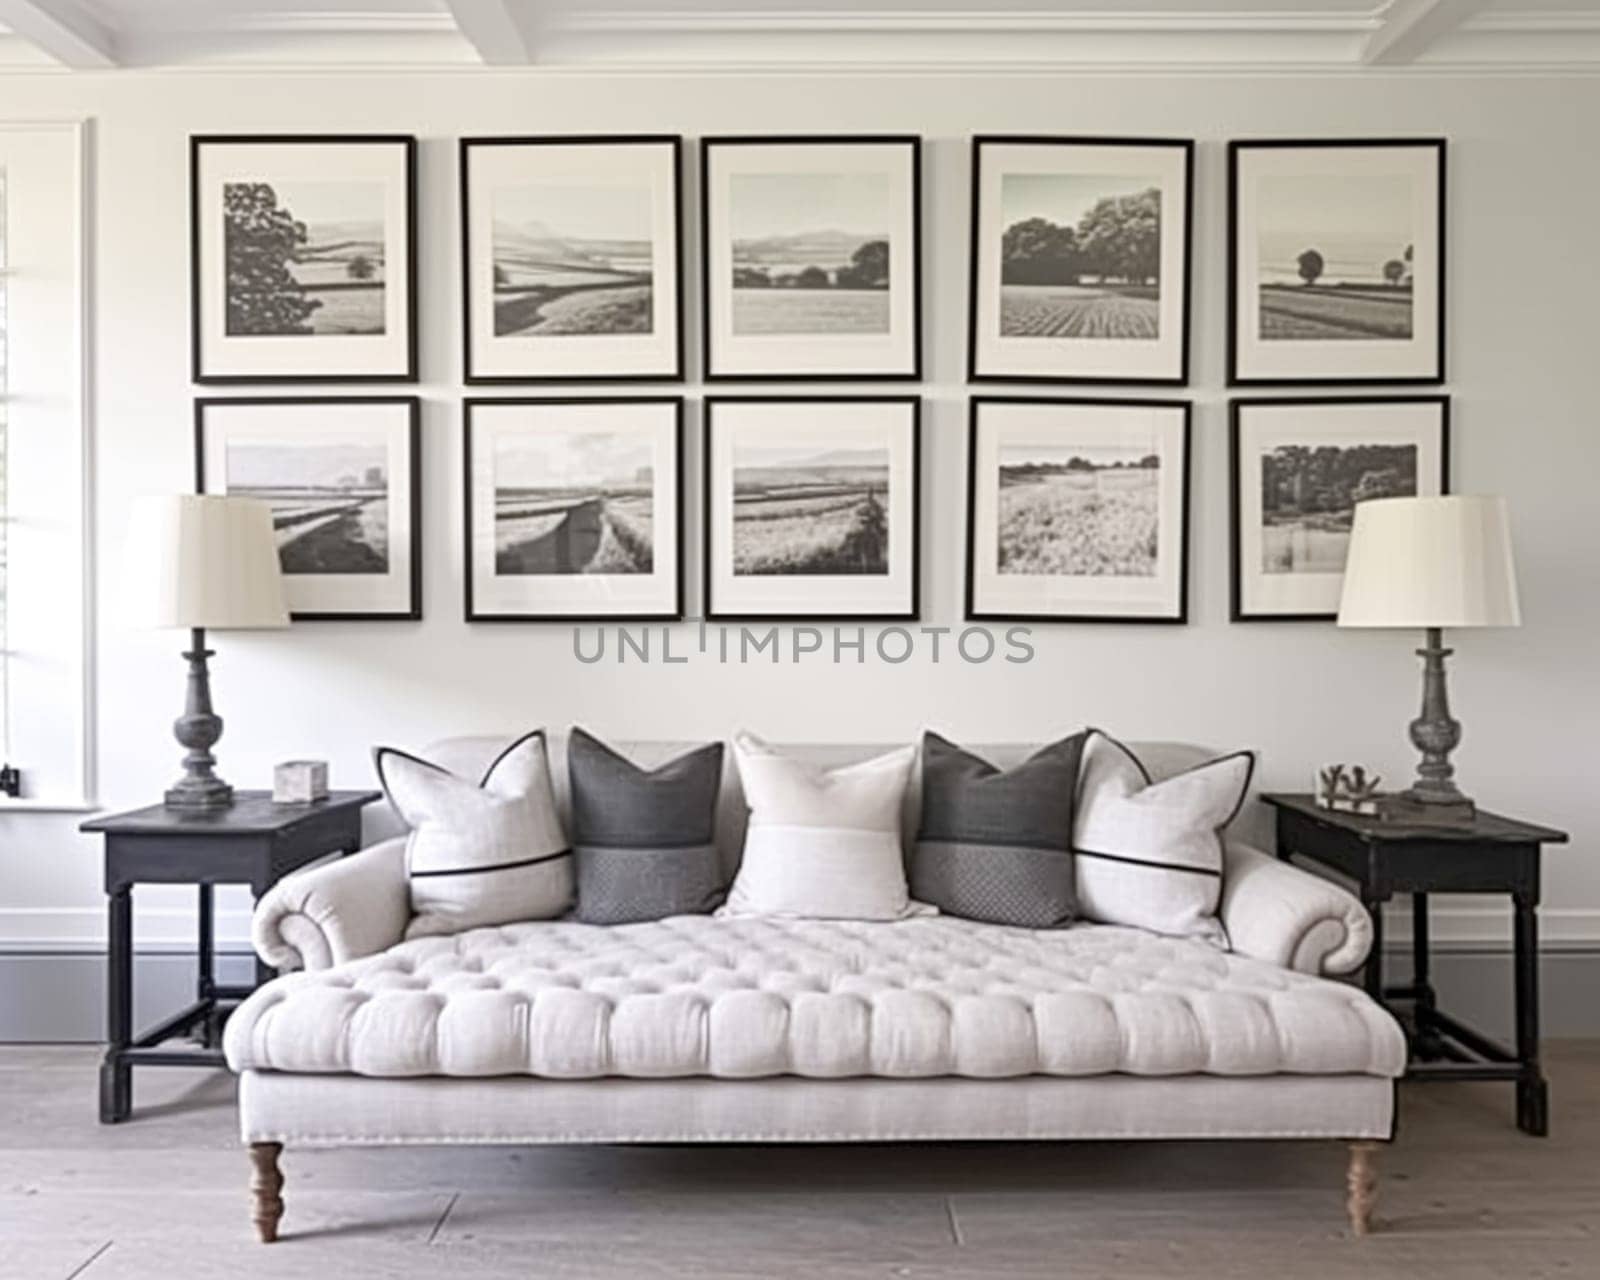 Minimalistic gallery wall, wall art, home decor and framed art in the English country house interior, room for diy printable artwork mockup and print shop sale